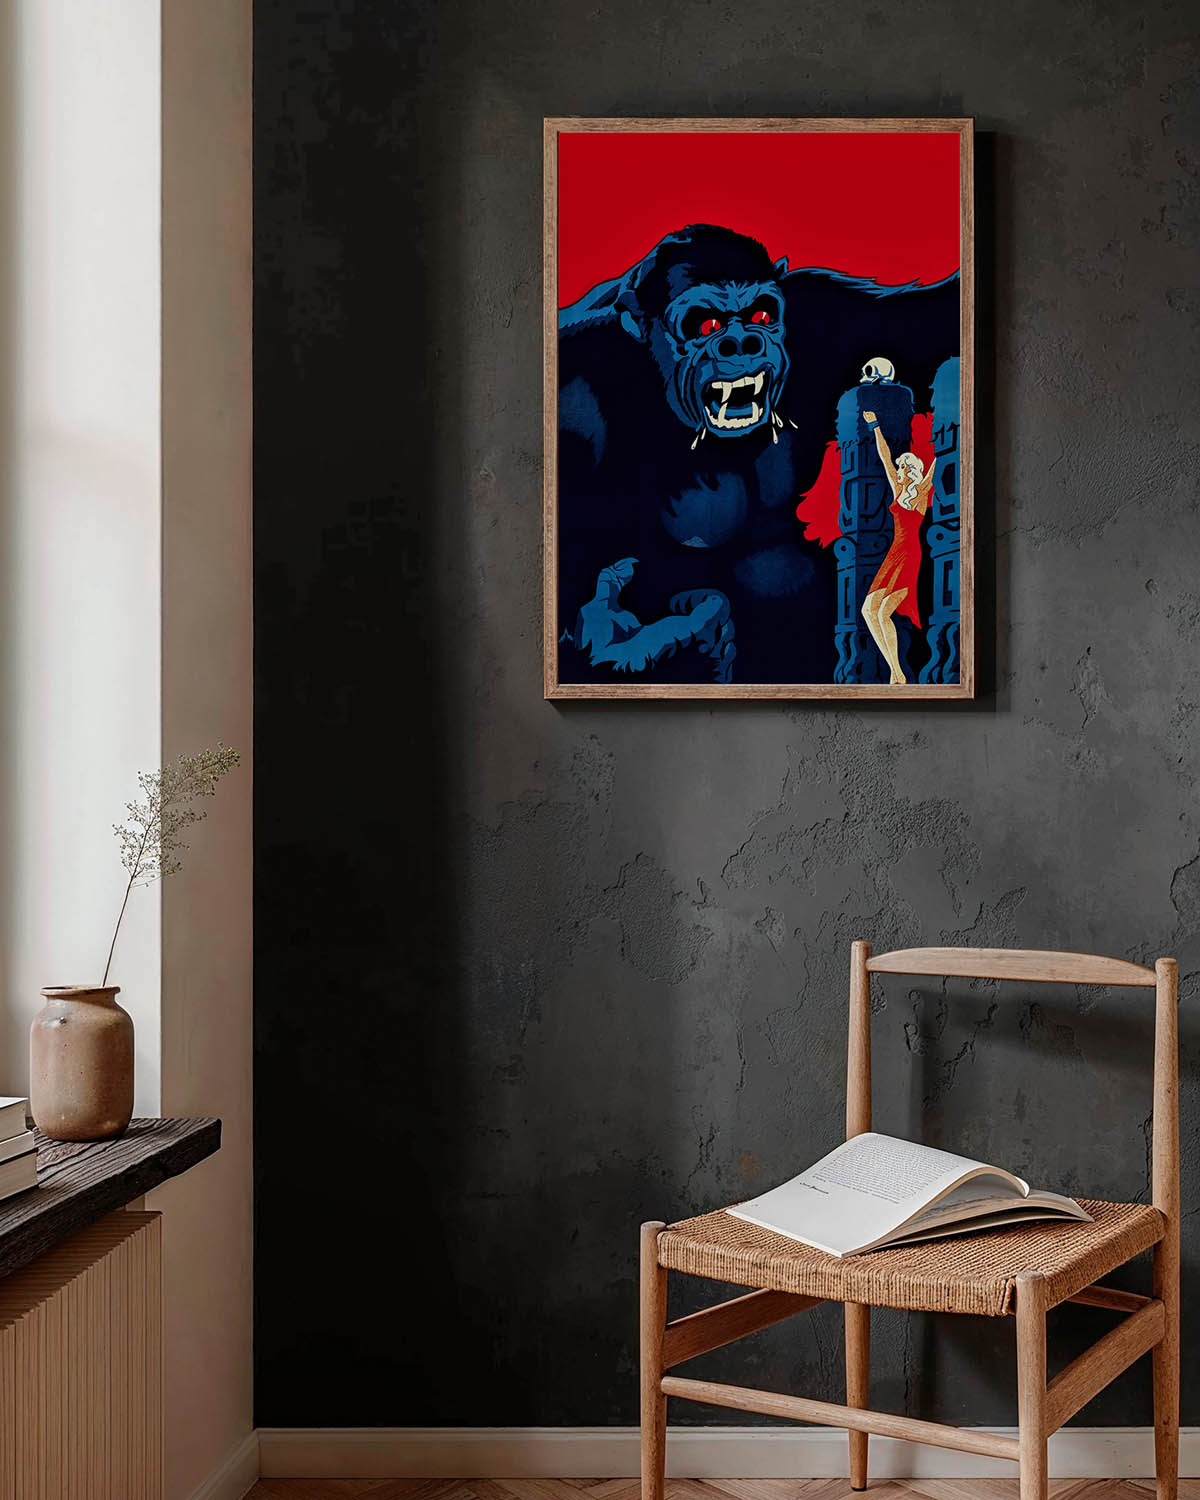 Vintage 1933 King Kong movie poster for the Danish release, featuring a large gorilla with red eyes looming behind a silhouette of a woman in a red dress.